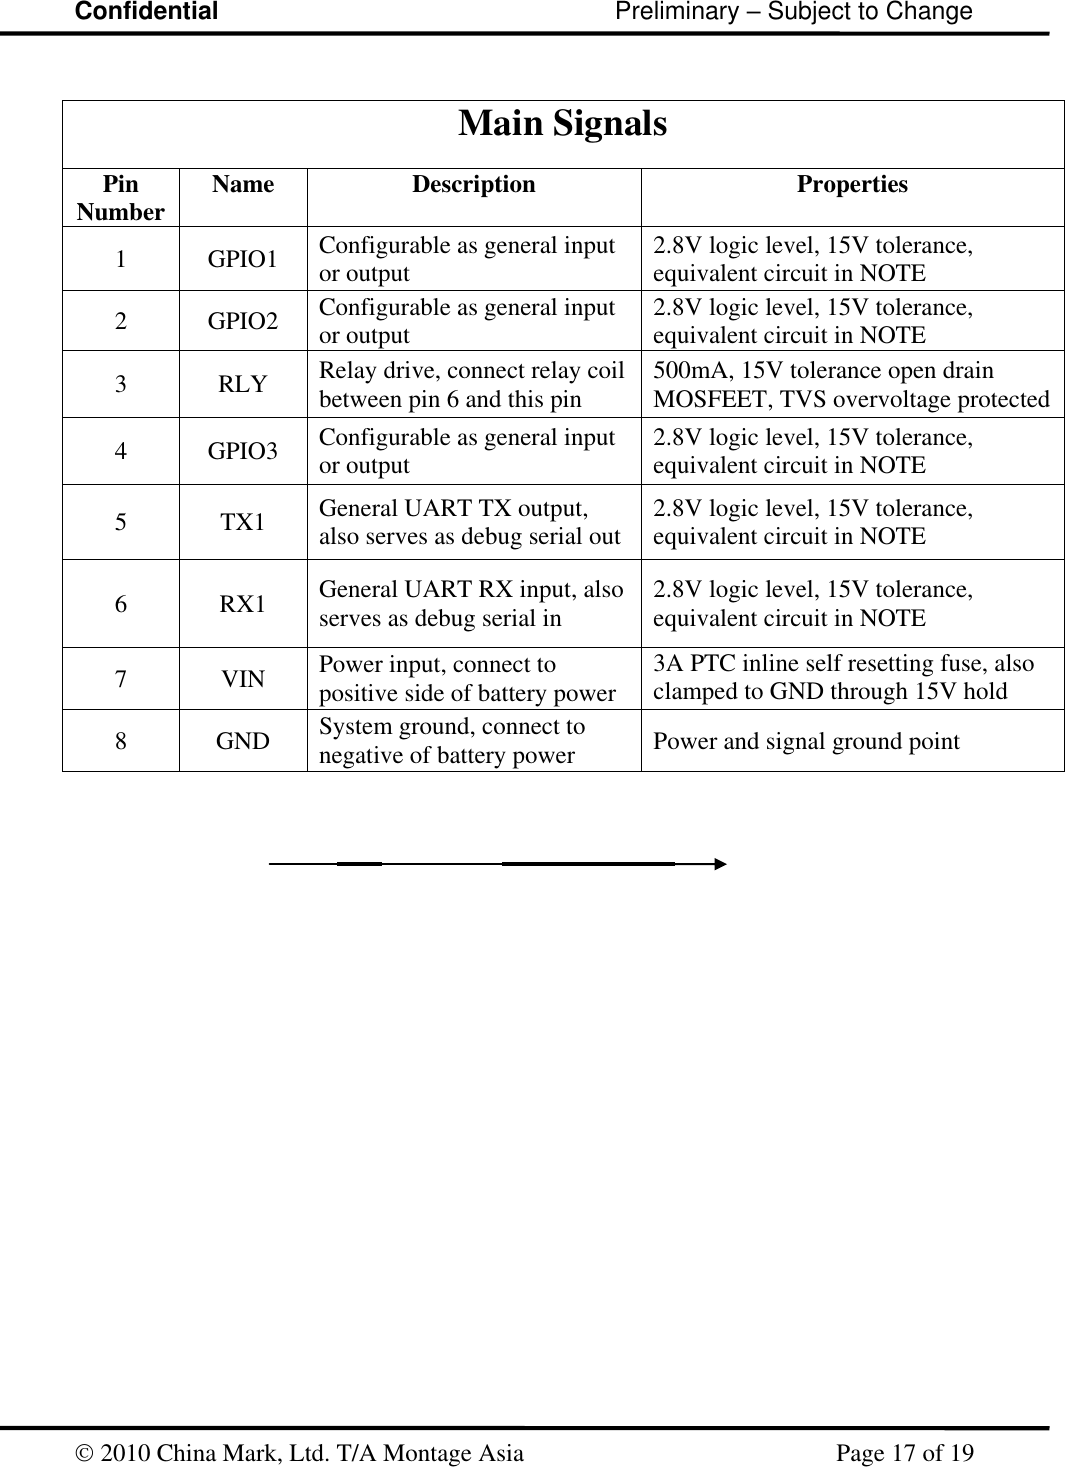 Confidential                                                         Preliminary – Subject to Change   2010 China Mark, Ltd. T/A Montage Asia   Page 17 of 19   Main Signals Pin Number Name Description Properties 1 GPIO1 Configurable as general input or output  2.8V logic level, 15V tolerance, equivalent circuit in NOTE 2 GPIO2 Configurable as general input or output  2.8V logic level, 15V tolerance, equivalent circuit in NOTE 3 RLY Relay drive, connect relay coil between pin 6 and this pin 500mA, 15V tolerance open drain MOSFEET, TVS overvoltage protected 4 GPIO3 Configurable as general input or output 2.8V logic level, 15V tolerance, equivalent circuit in NOTE 5 TX1 General UART TX output, also serves as debug serial out 2.8V logic level, 15V tolerance, equivalent circuit in NOTE 6 RX1 General UART RX input, also serves as debug serial in 2.8V logic level, 15V tolerance, equivalent circuit in NOTE 7 VIN Power input, connect to positive side of battery power 3A PTC inline self resetting fuse, also clamped to GND through 15V hold TVS diode 8 GND System ground, connect to negative of battery power Power and signal ground point       